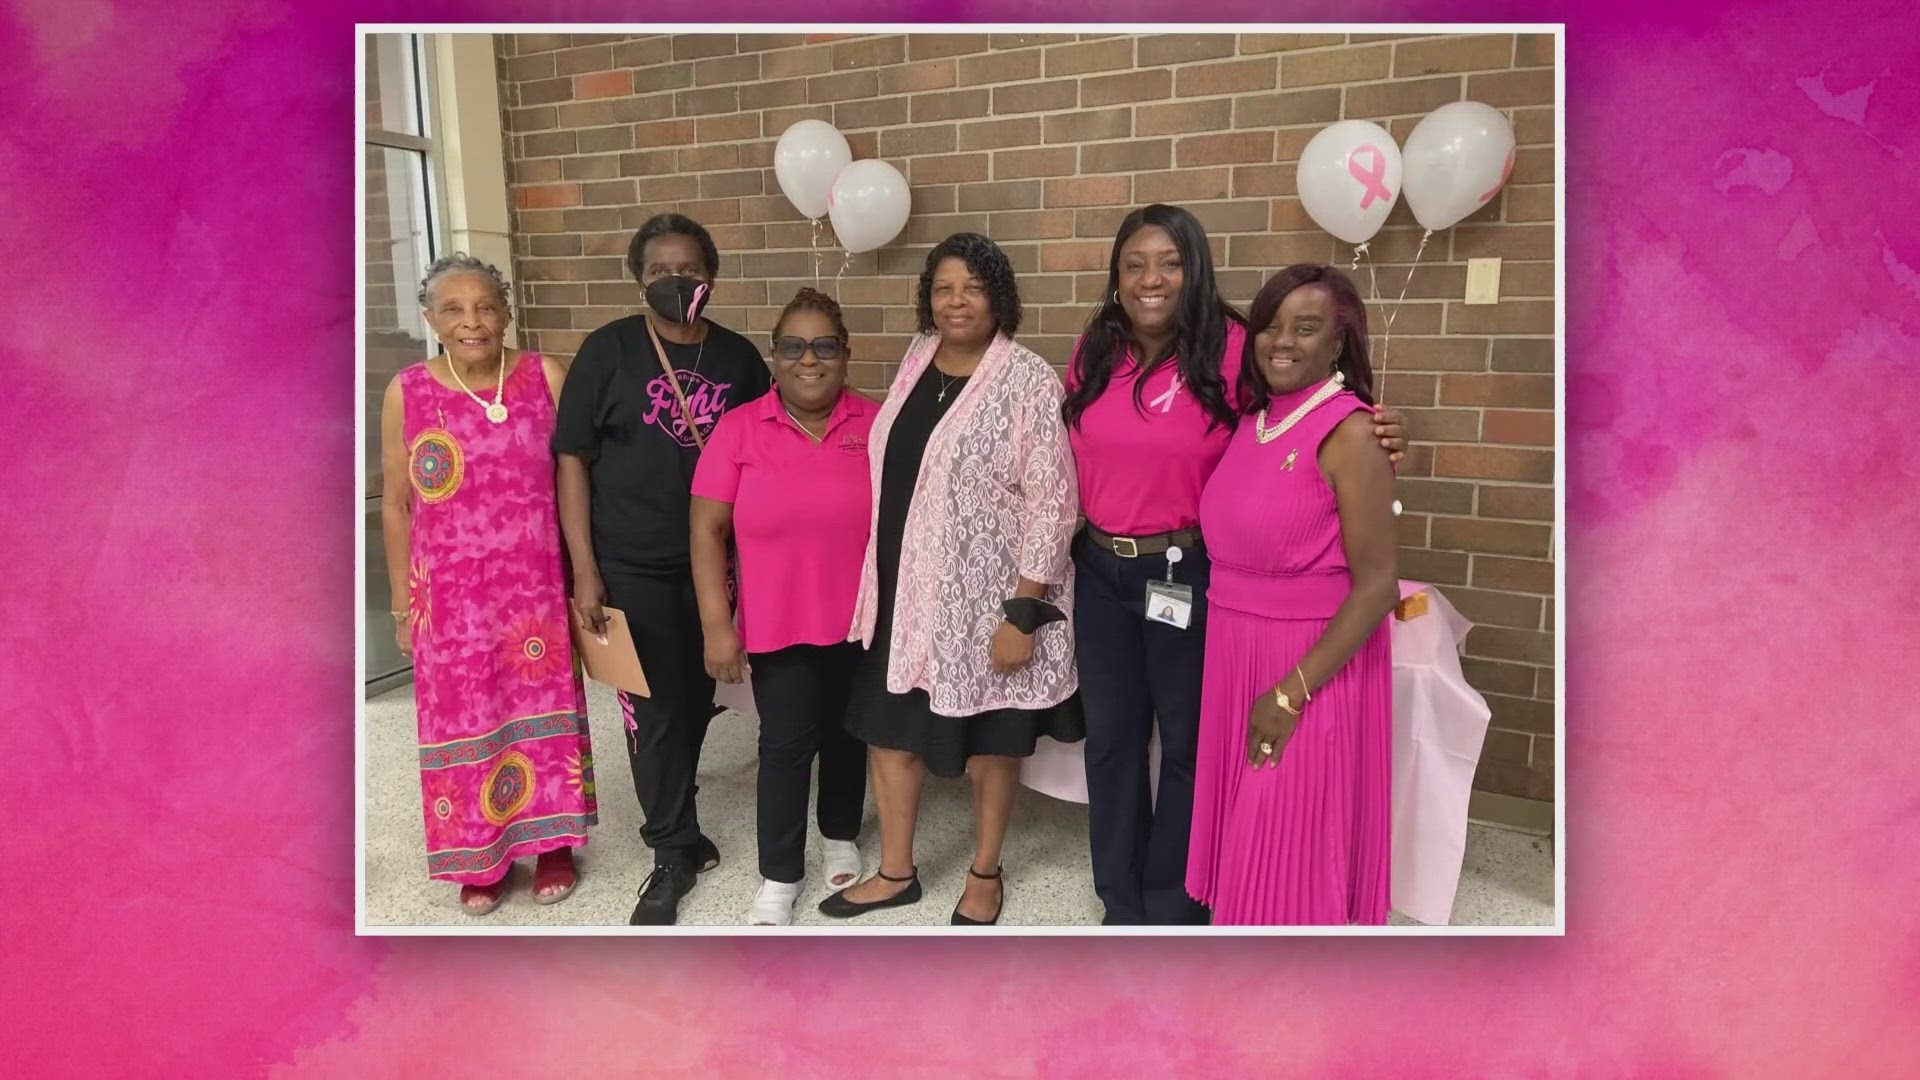 The Buddy Bus, a project between First Coast News and Baptist MD Anderson is reaching underserved women.  Here's how to apply for a no-cost mammogram.